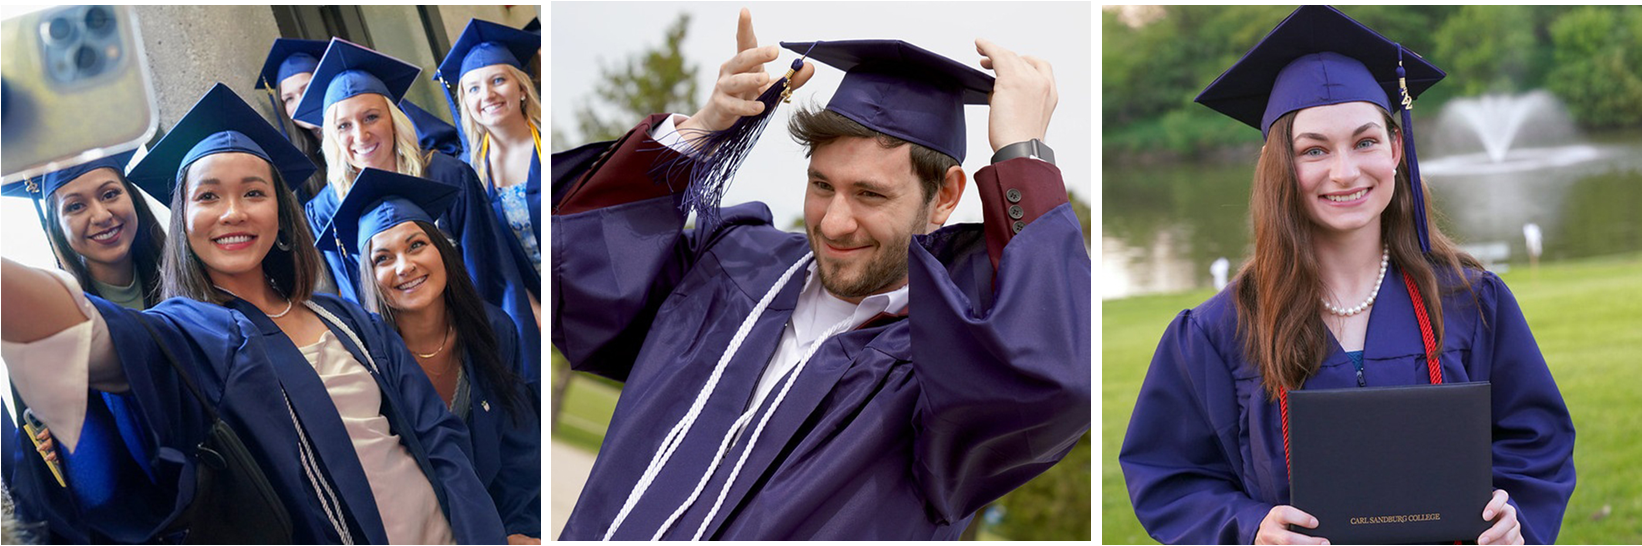 photos of student in cap and gowns at graduation.